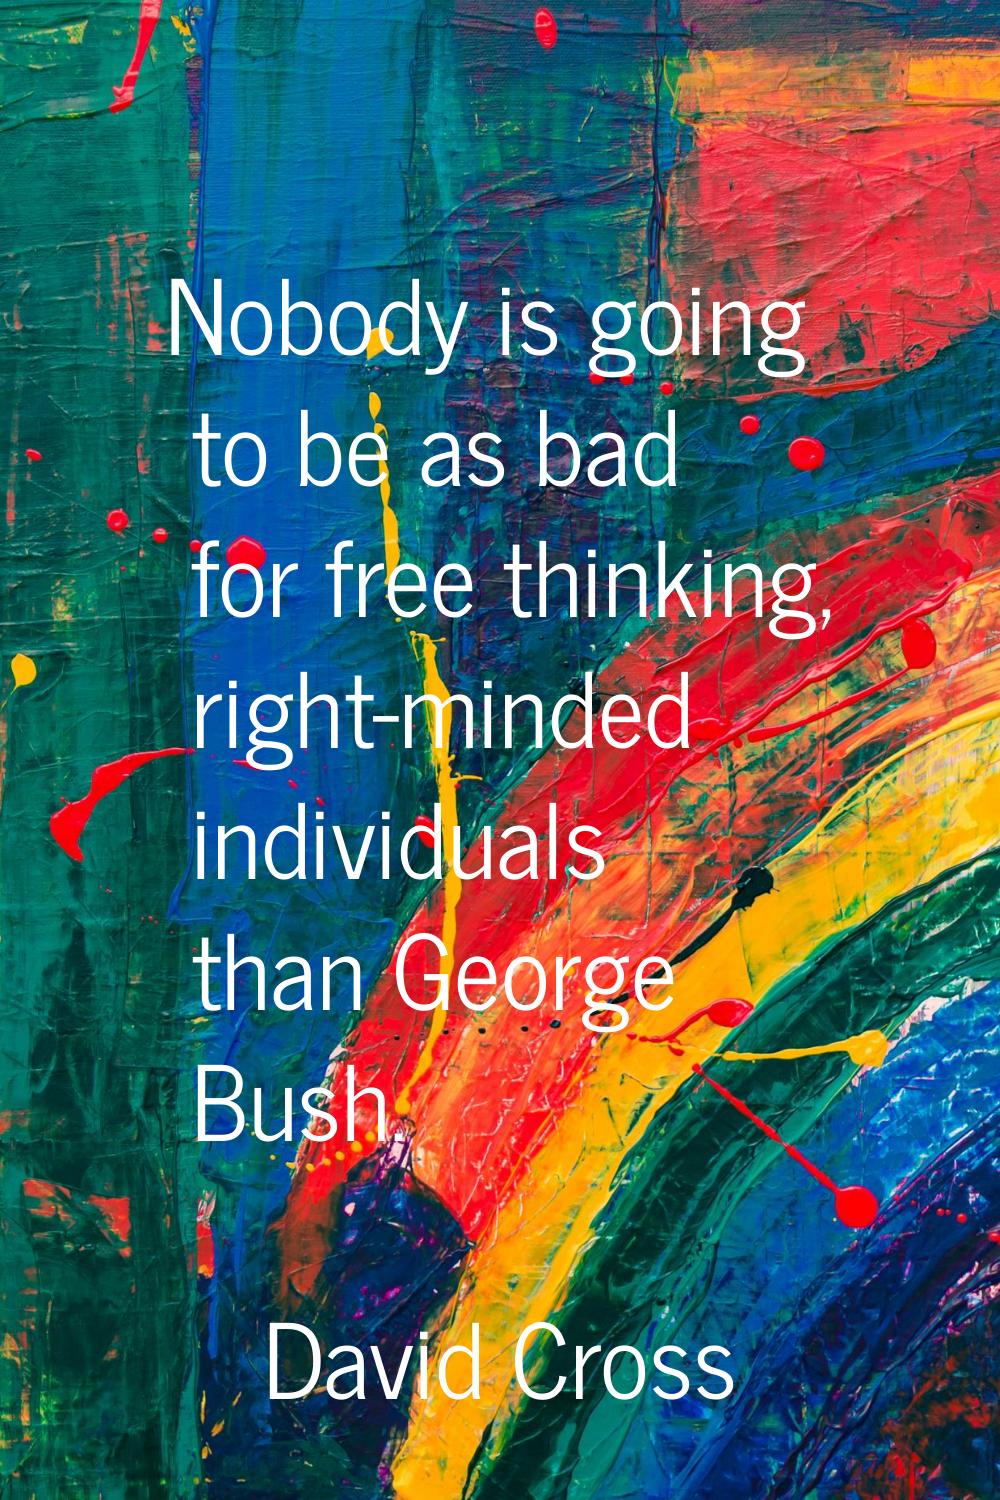 Nobody is going to be as bad for free thinking, right-minded individuals than George Bush.